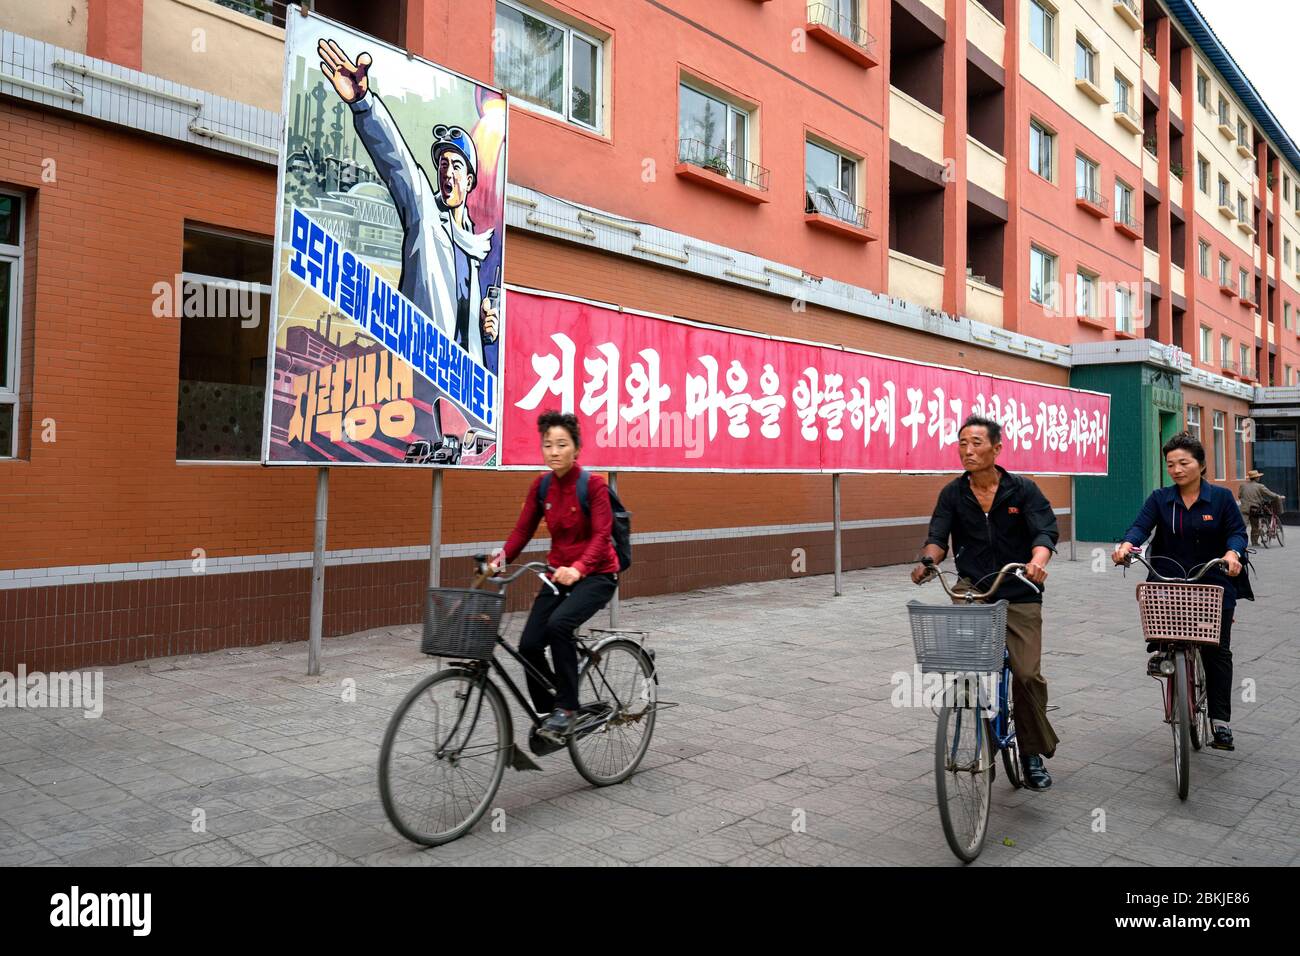 North Korea, Chongjin the second largest town in the country, Révolutionary slogans Stock Photo